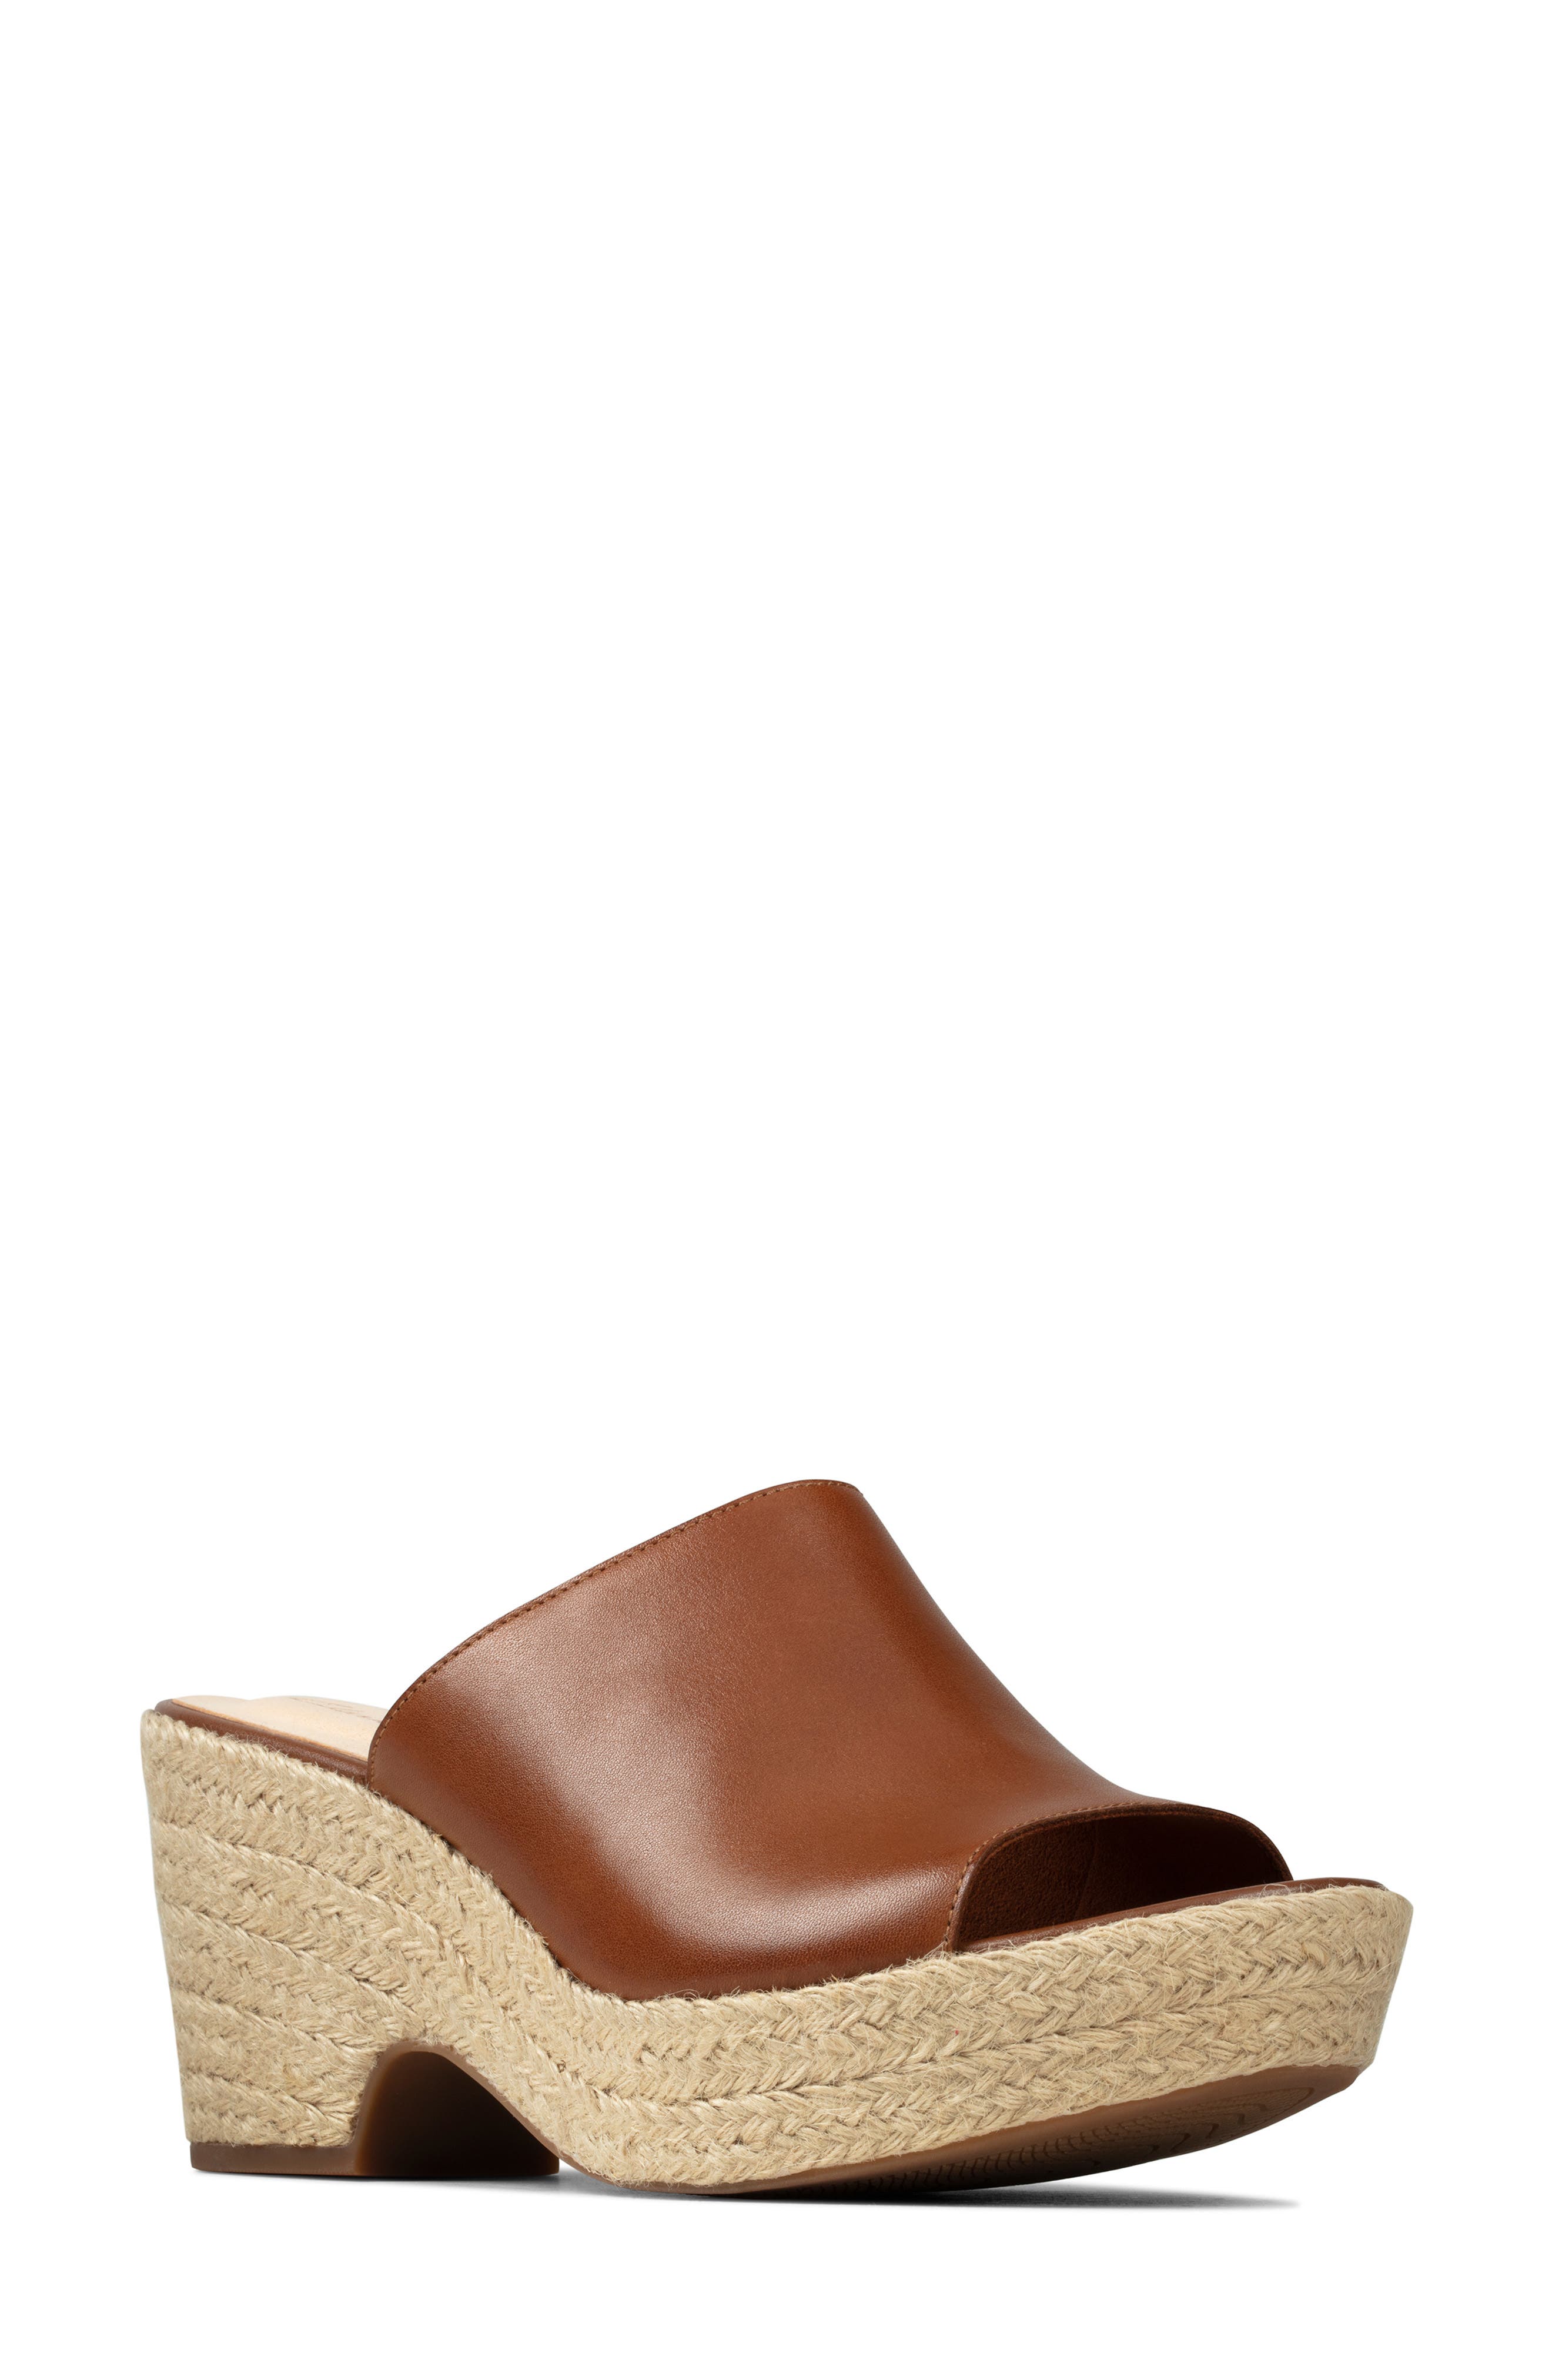 clarks outlet womens